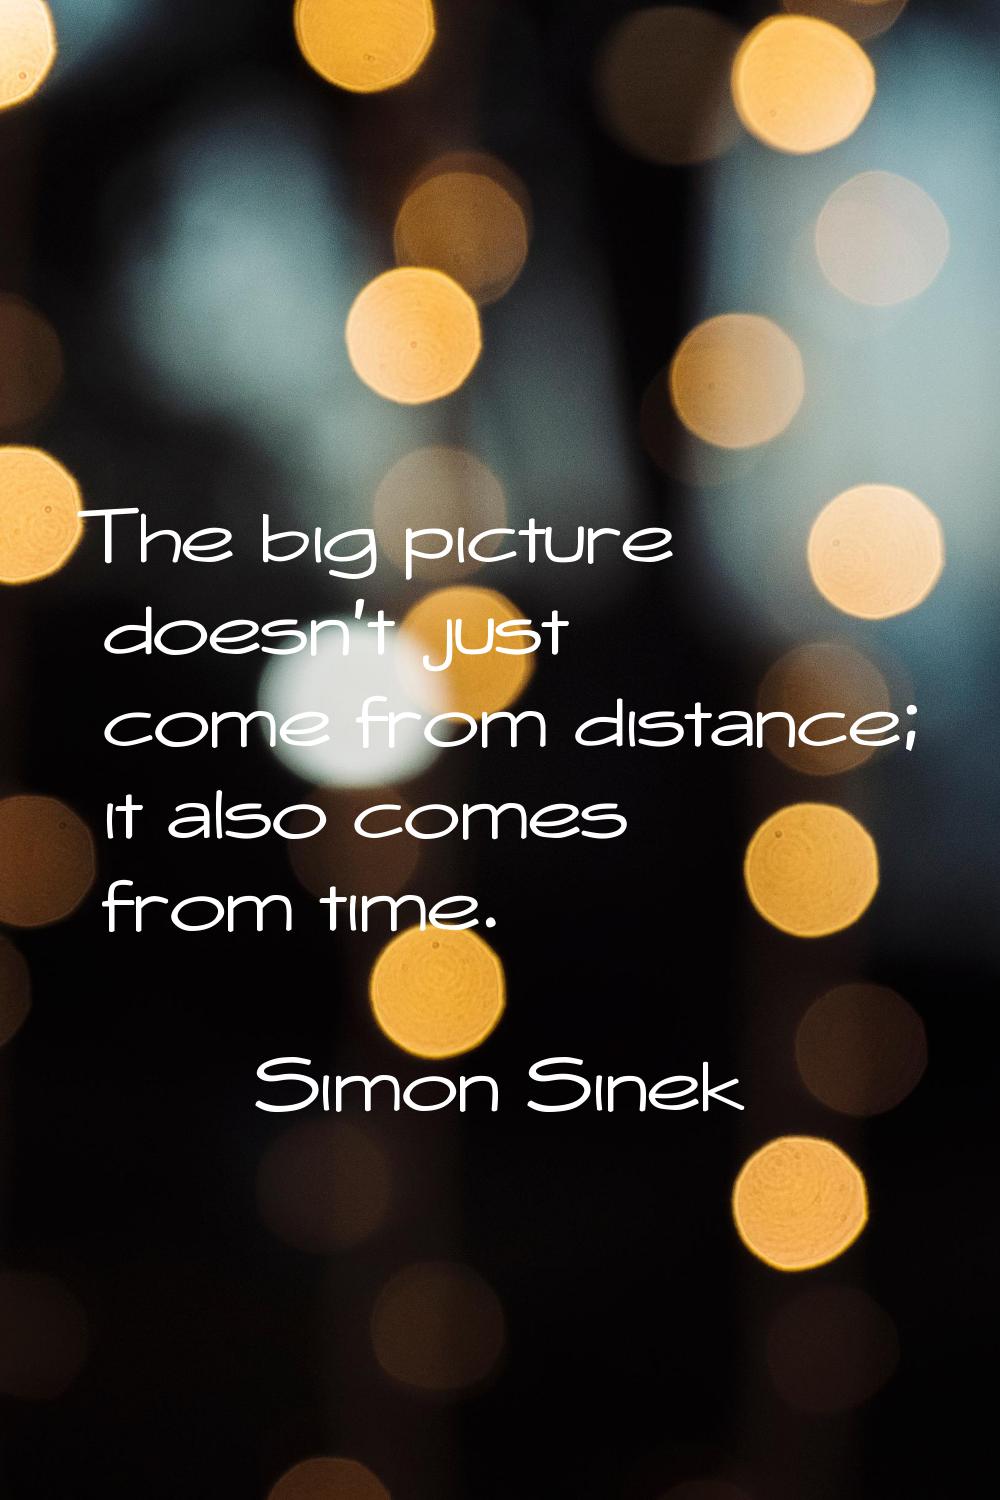 The big picture doesn't just come from distance; it also comes from time.